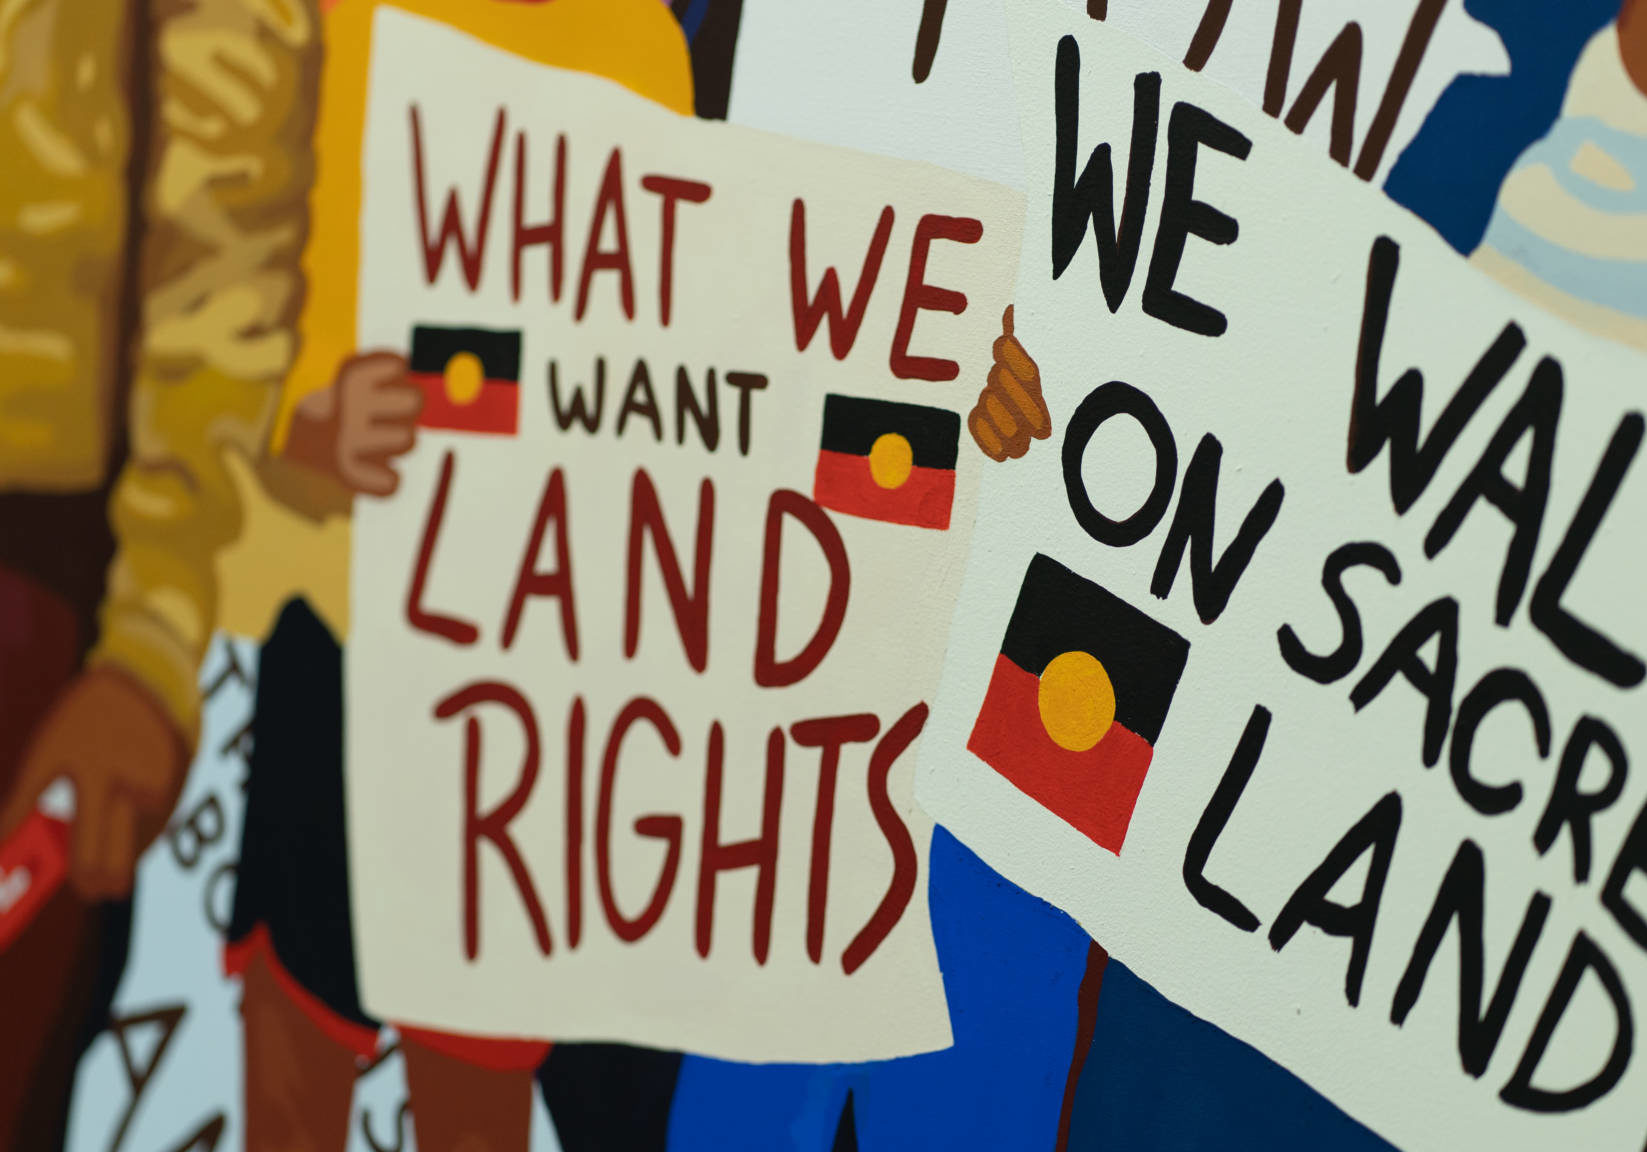 A painting of people holding signs that say "What we want: Land Rights" and "We walk on sacred Land" from the documentary YOU CAN GO NOW